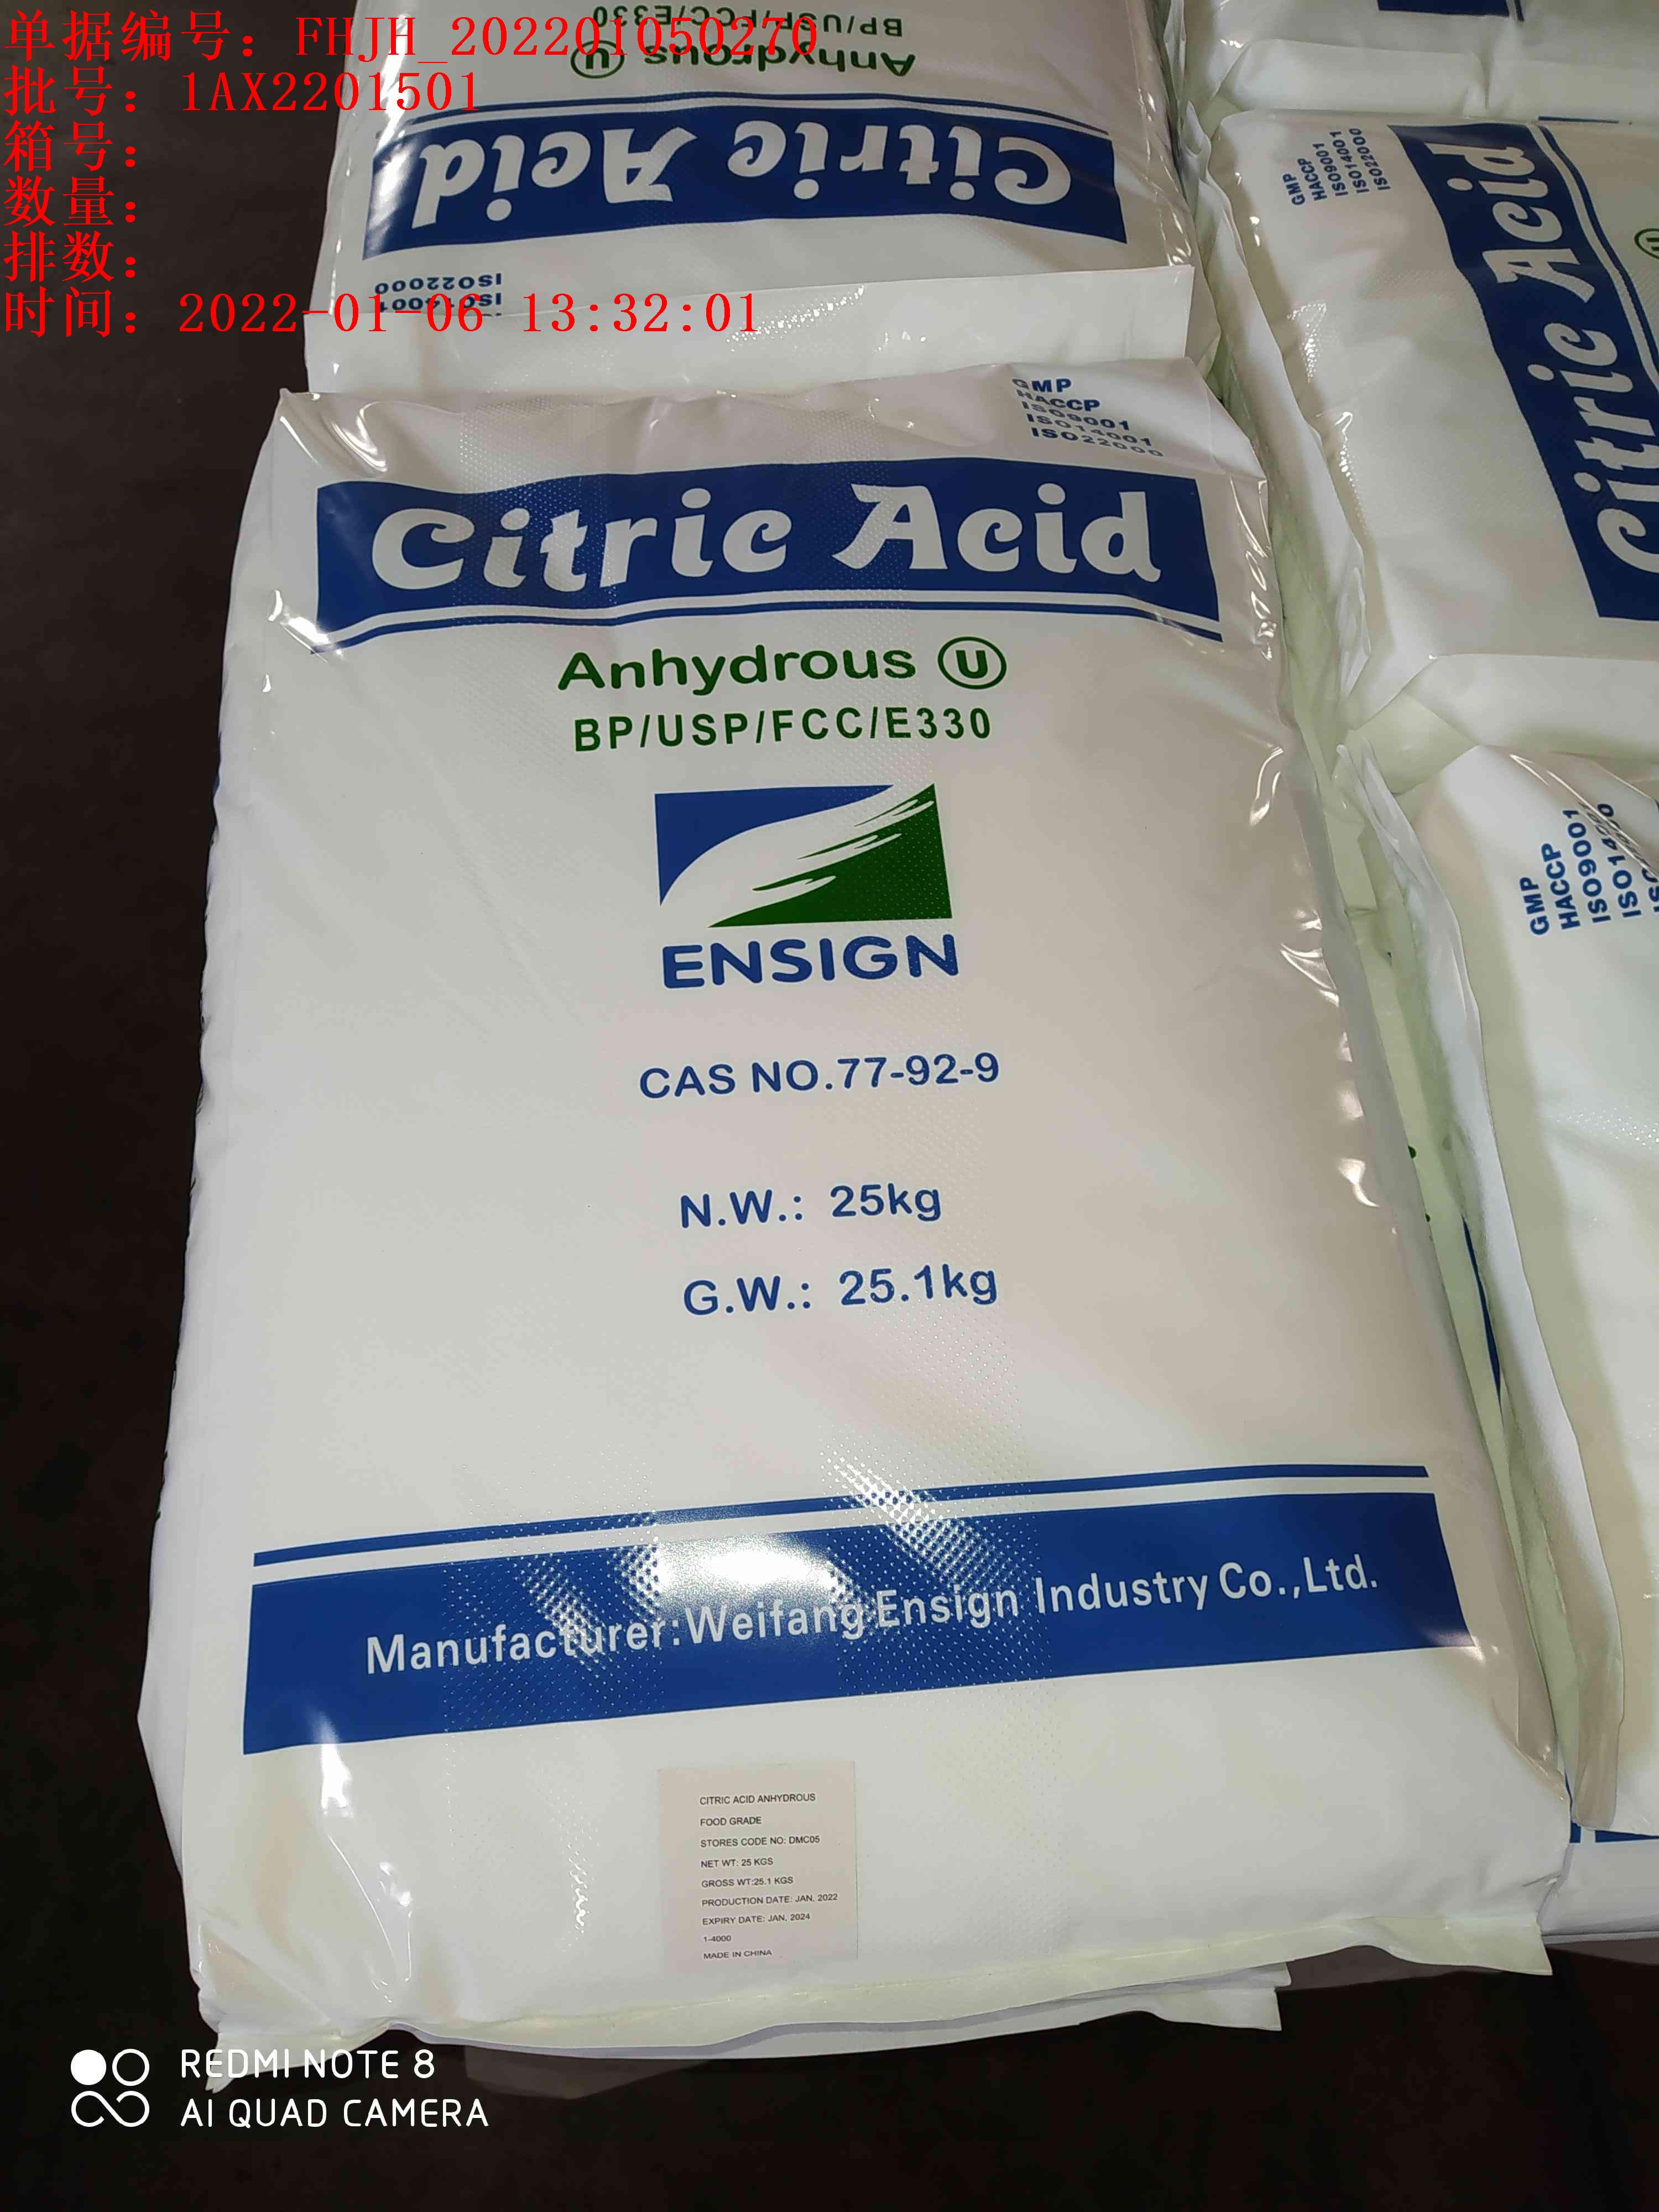 Storage Guidelines for Citric Acid and Citrates